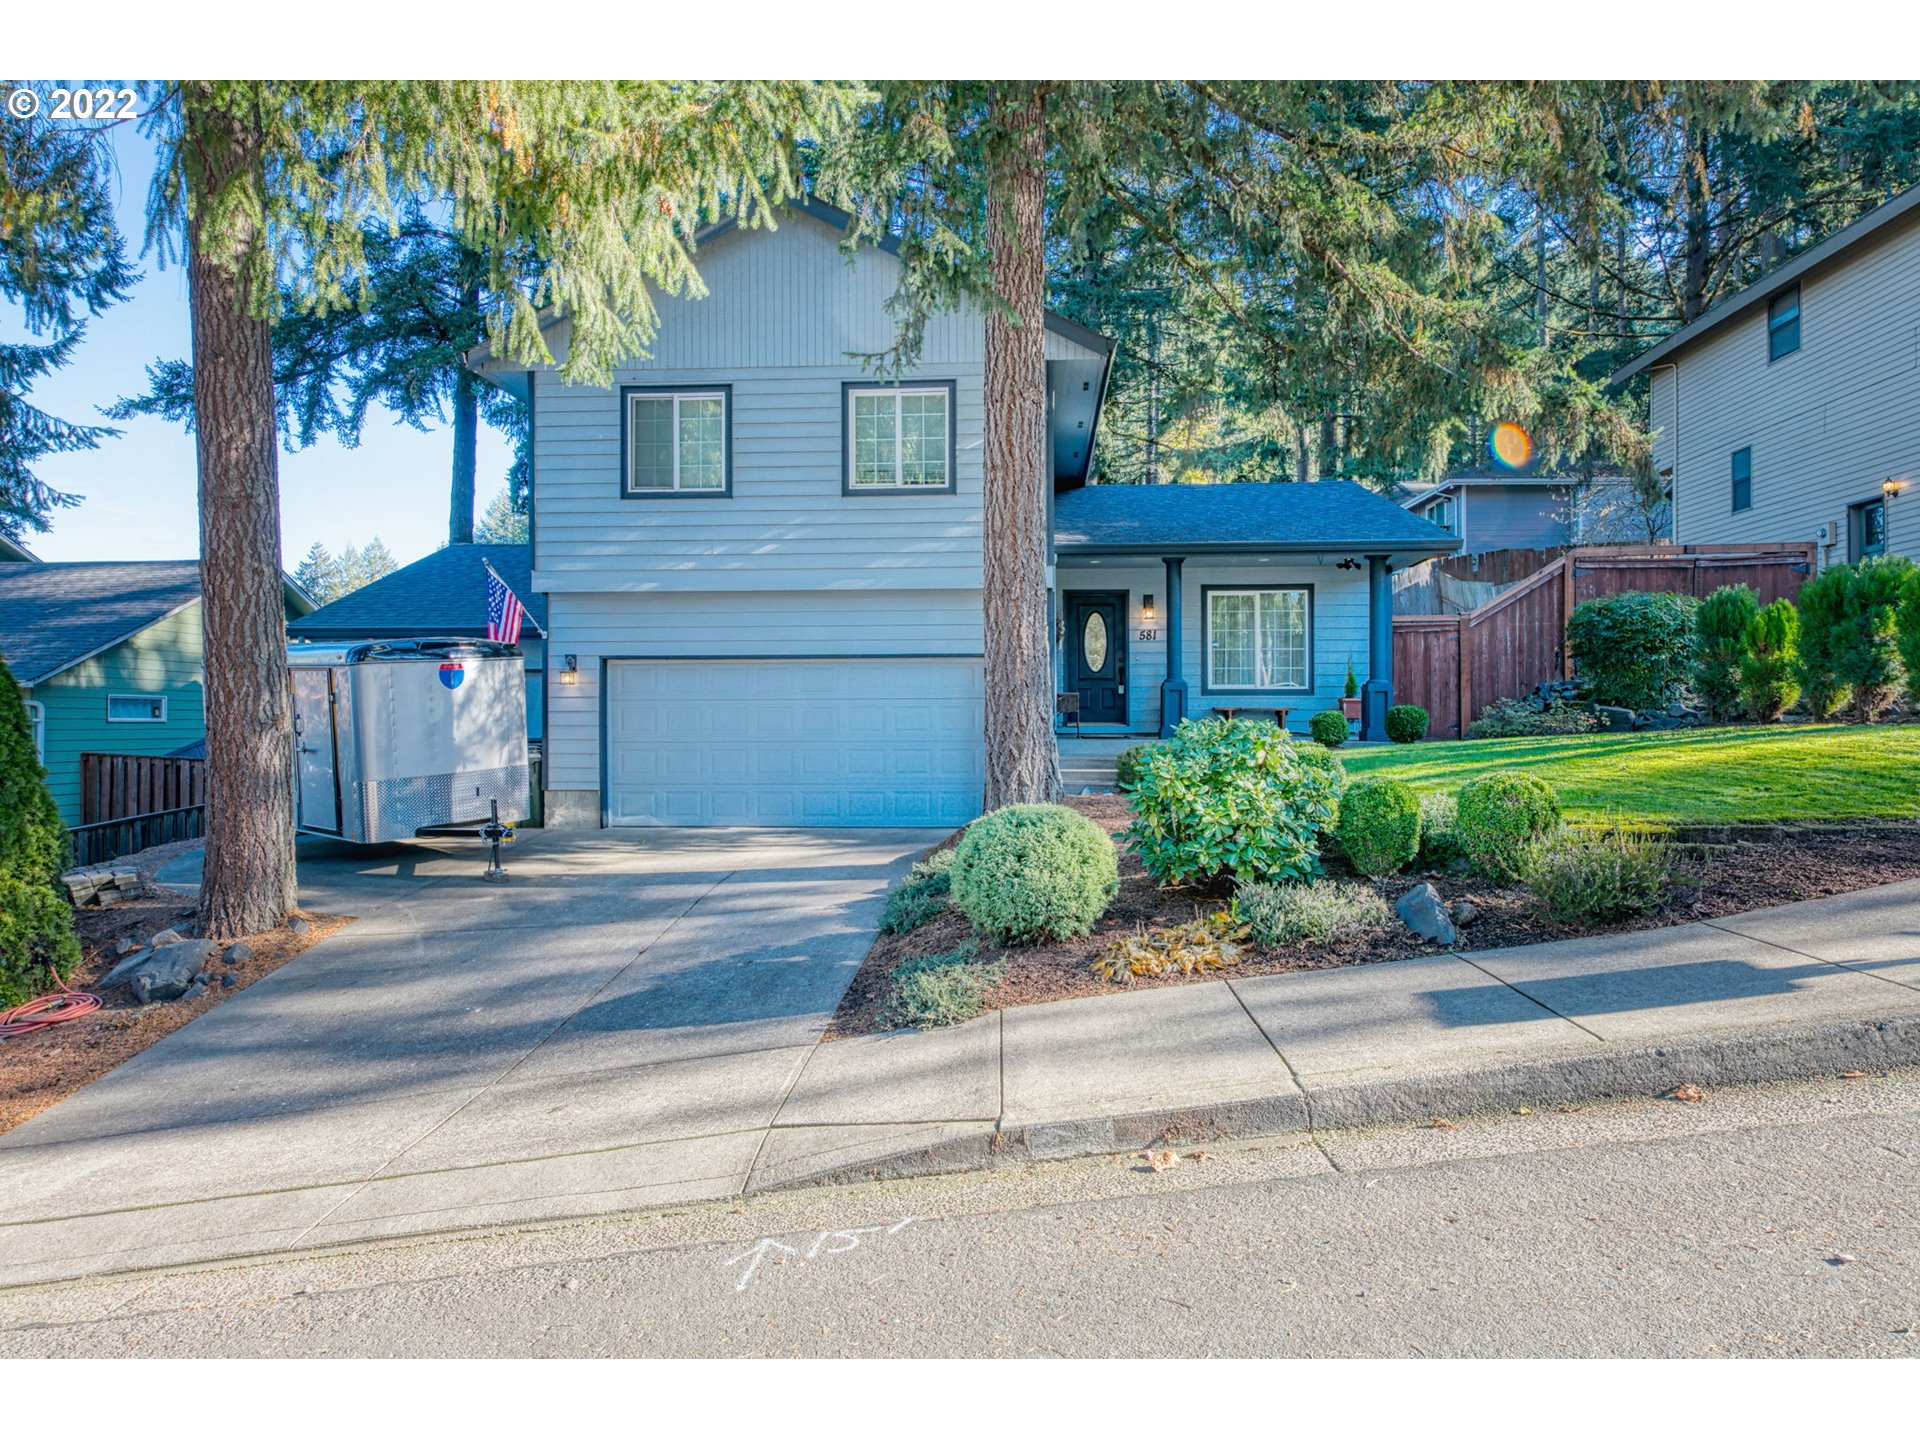 581 S 72ND ST, Springfield, OR 97478